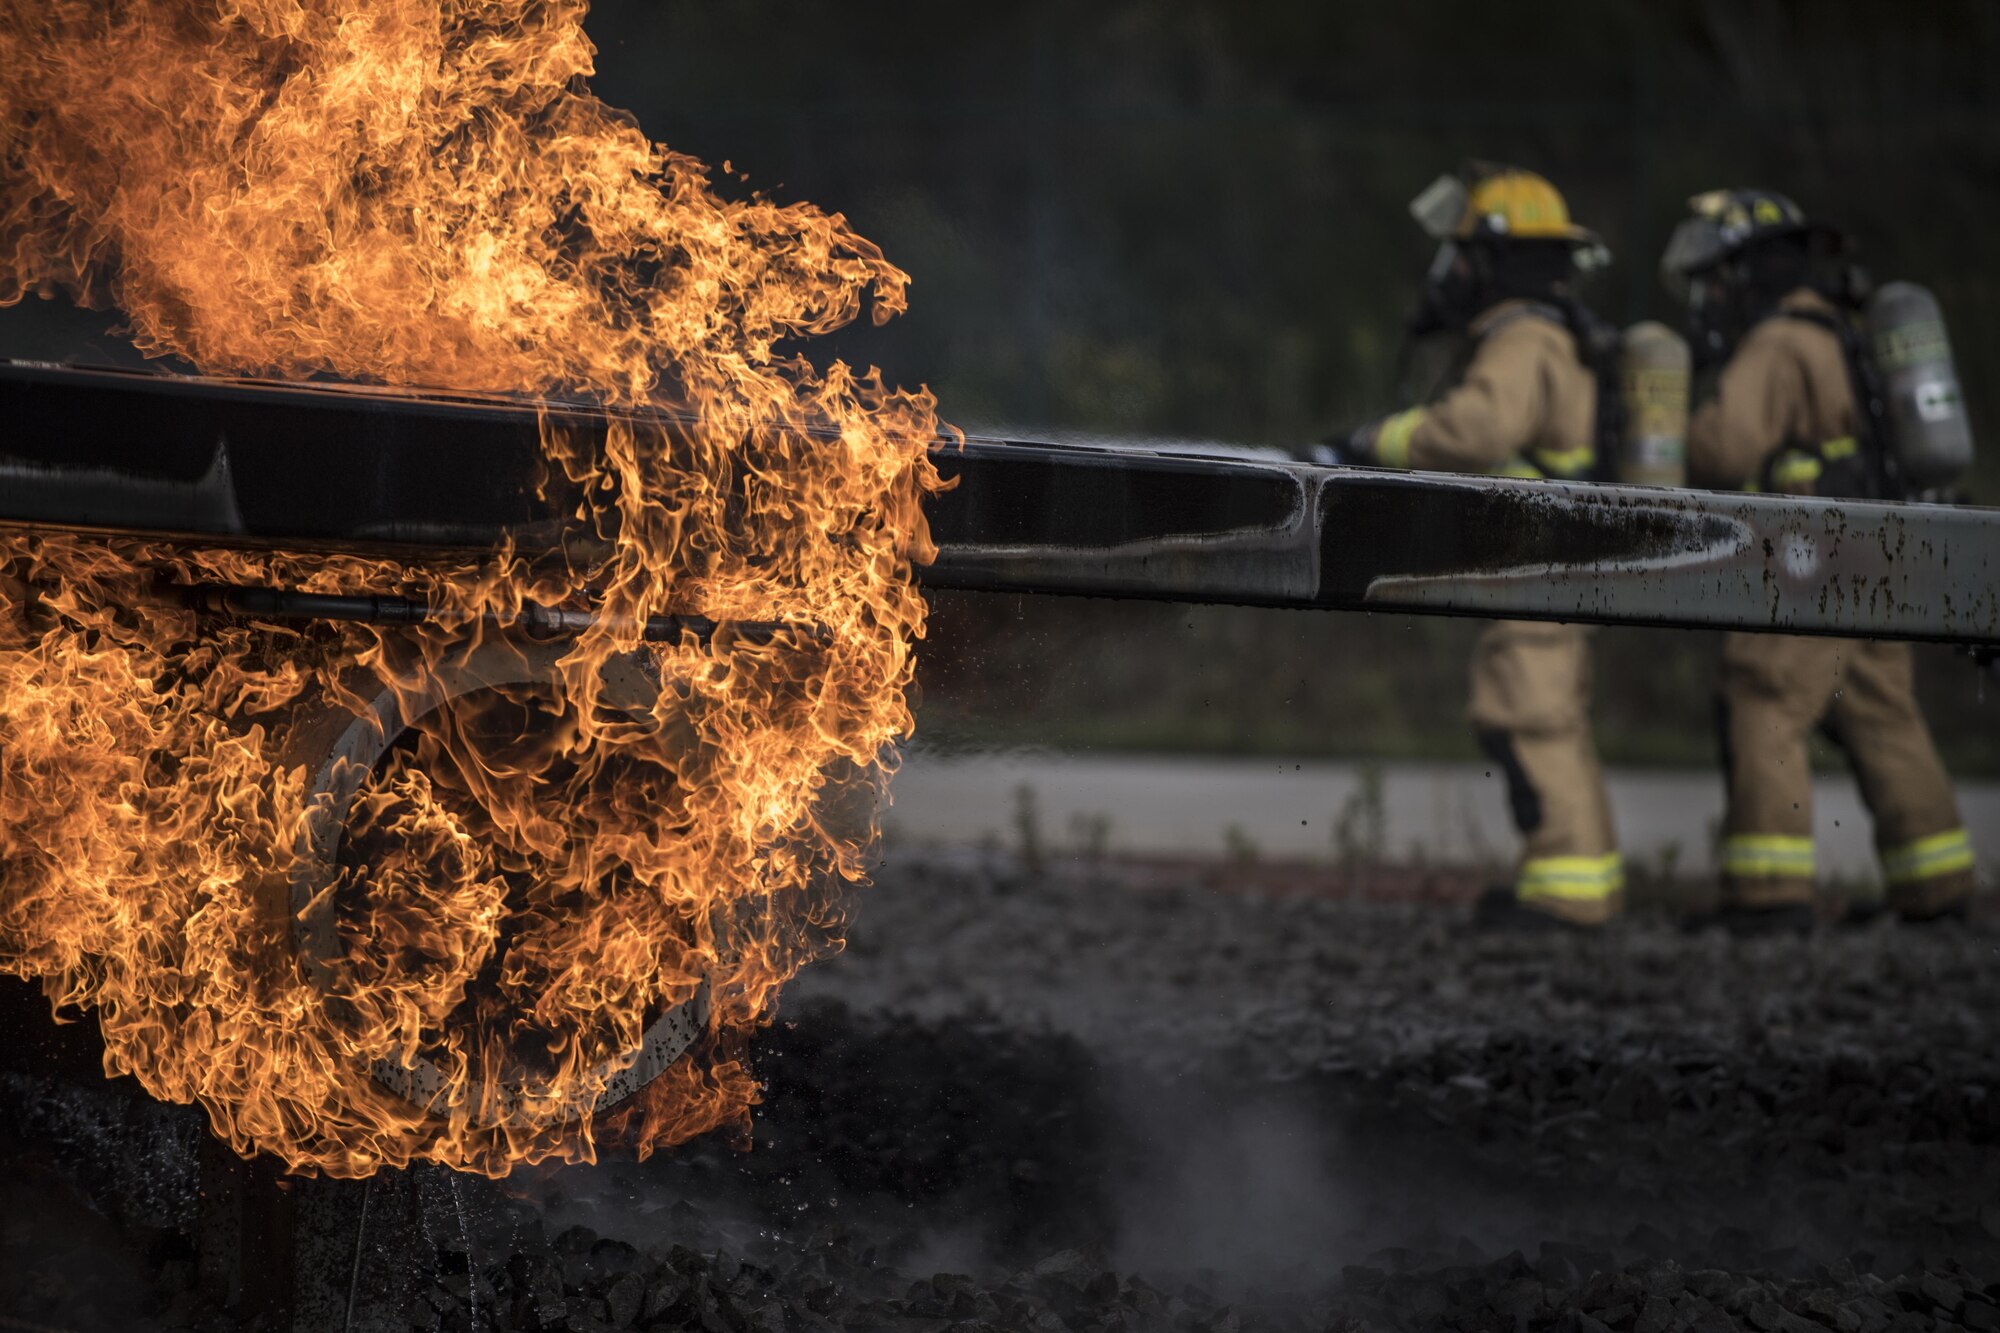 U.S. Air Force firefighters assigned to various bases put out a fire as part of a 10-day Silver Flag exercise at the 86th Civil Engineer Squadron Fire and Emergency Services Training Area on Ramstein Air Base, Germany, Sept. 14, 2017.